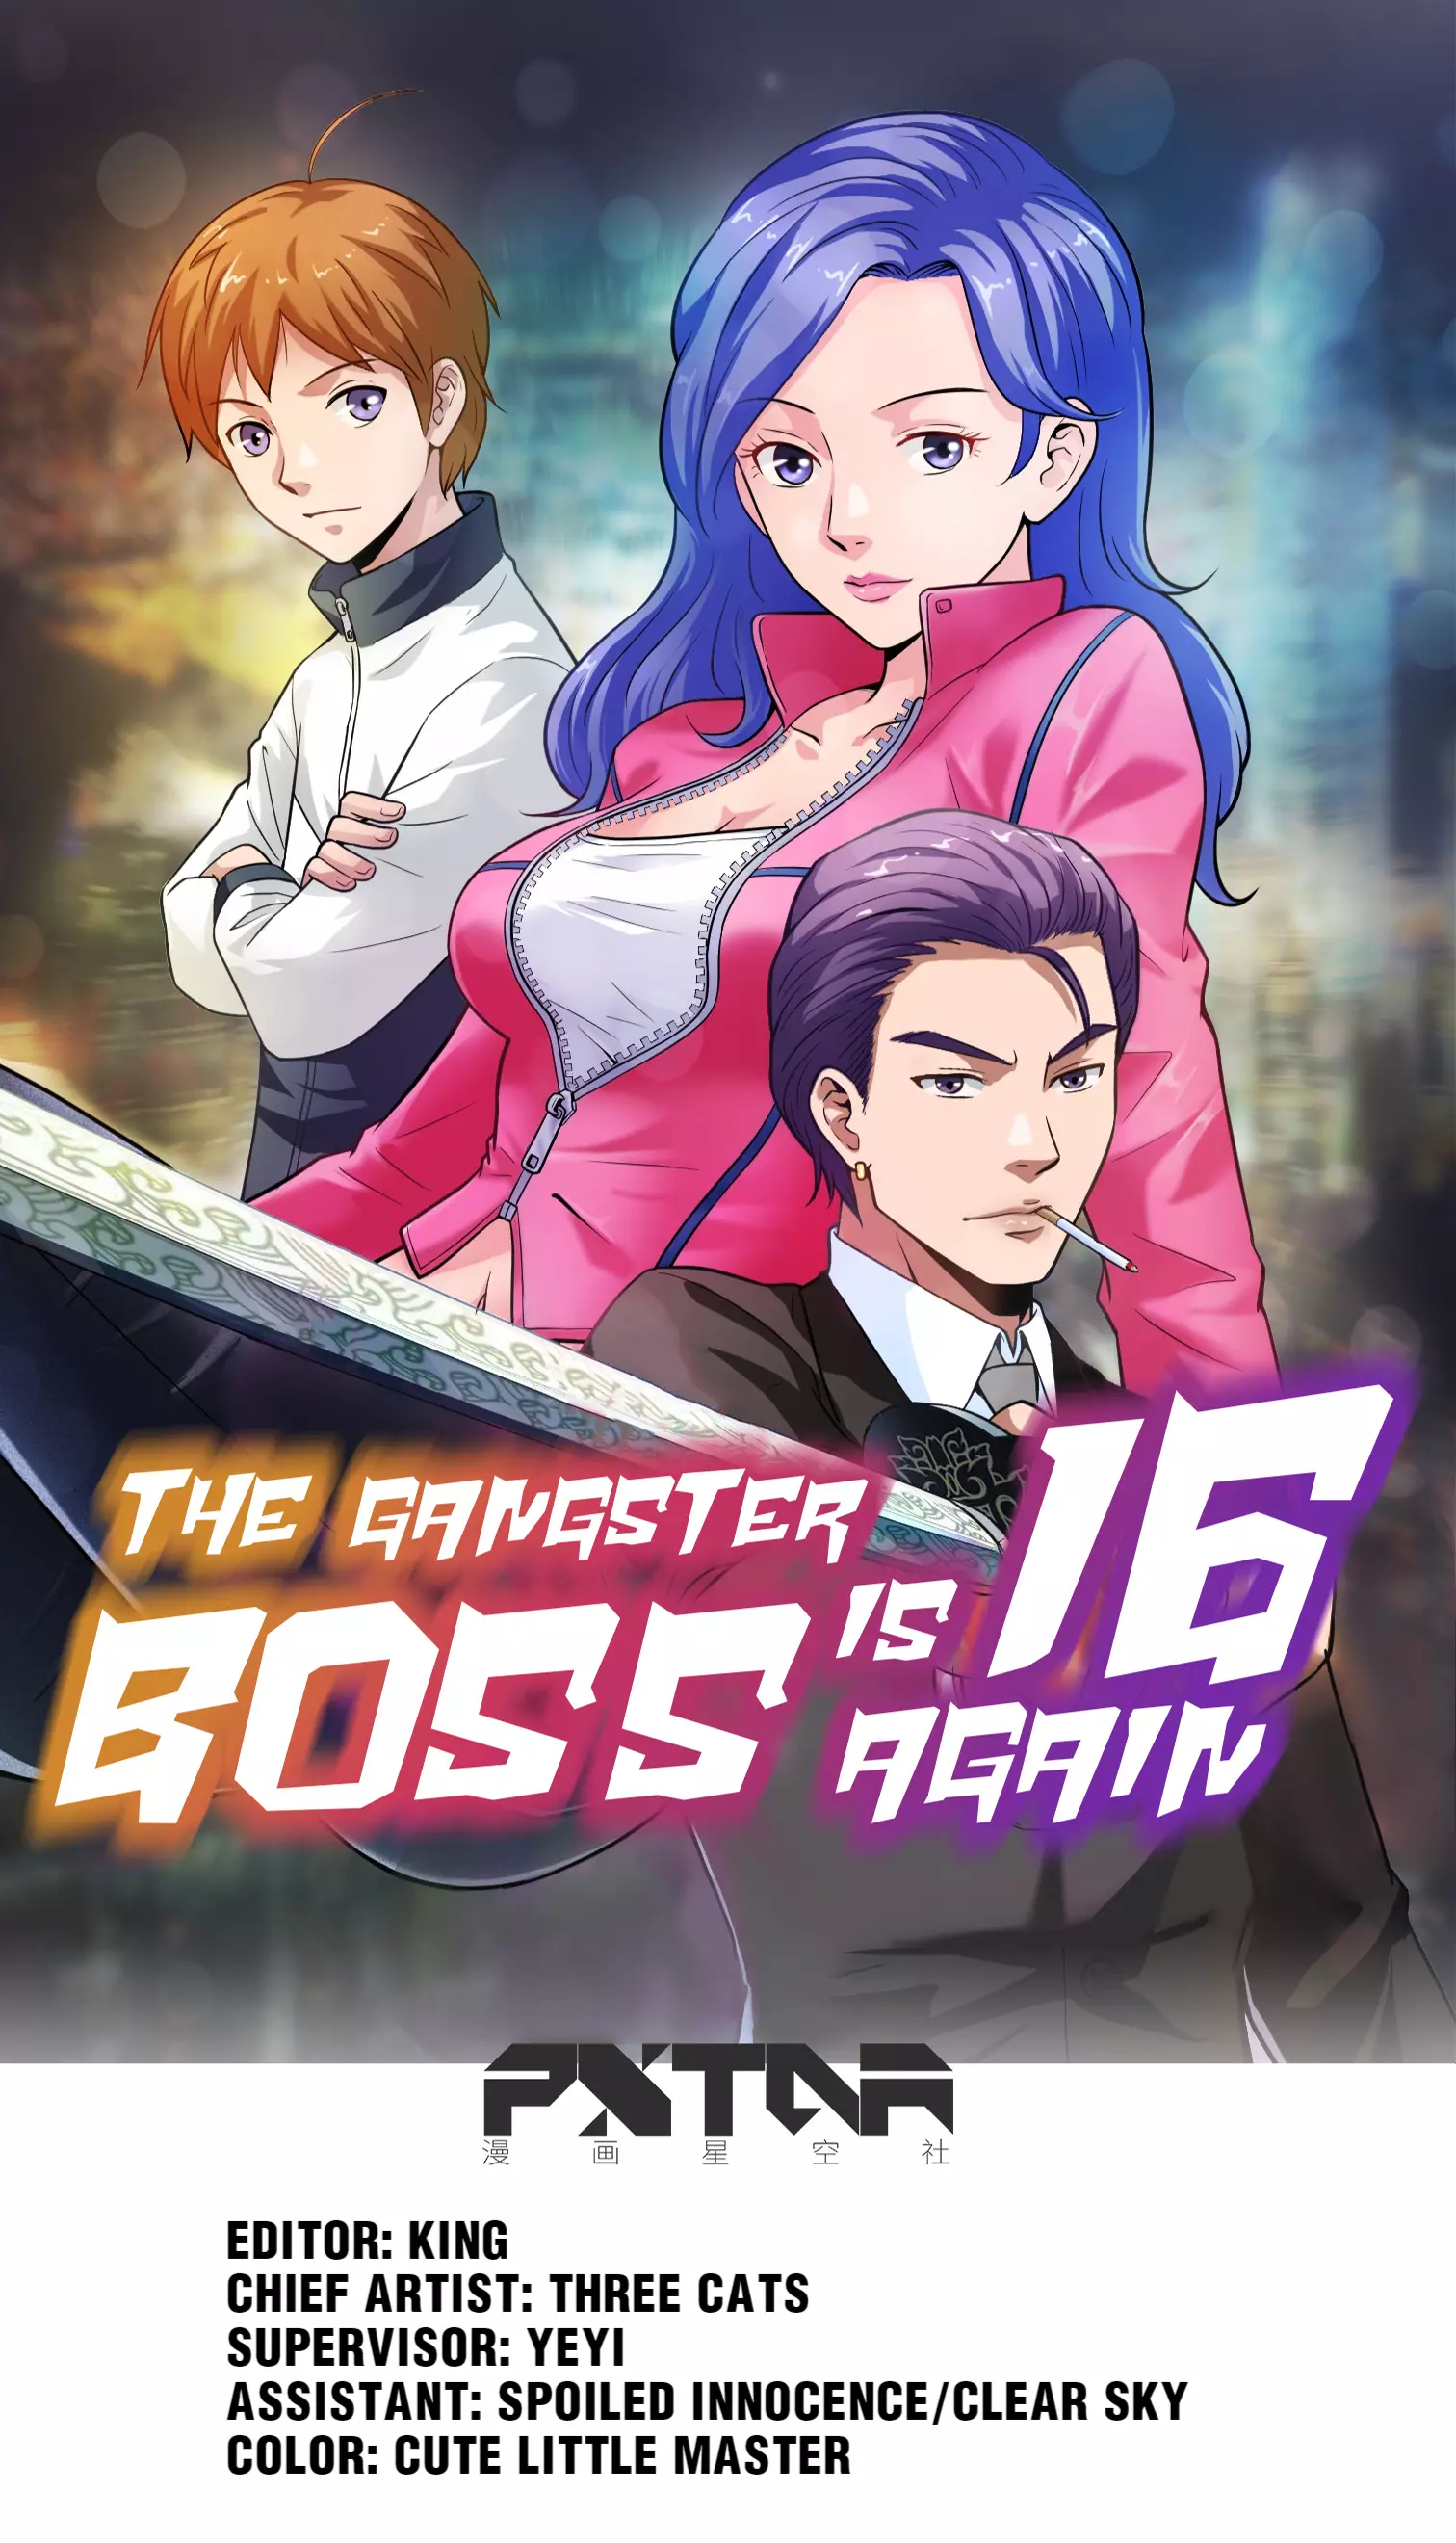 The Gangster Boss Is 16 Again - 27 page 1-1a42045b